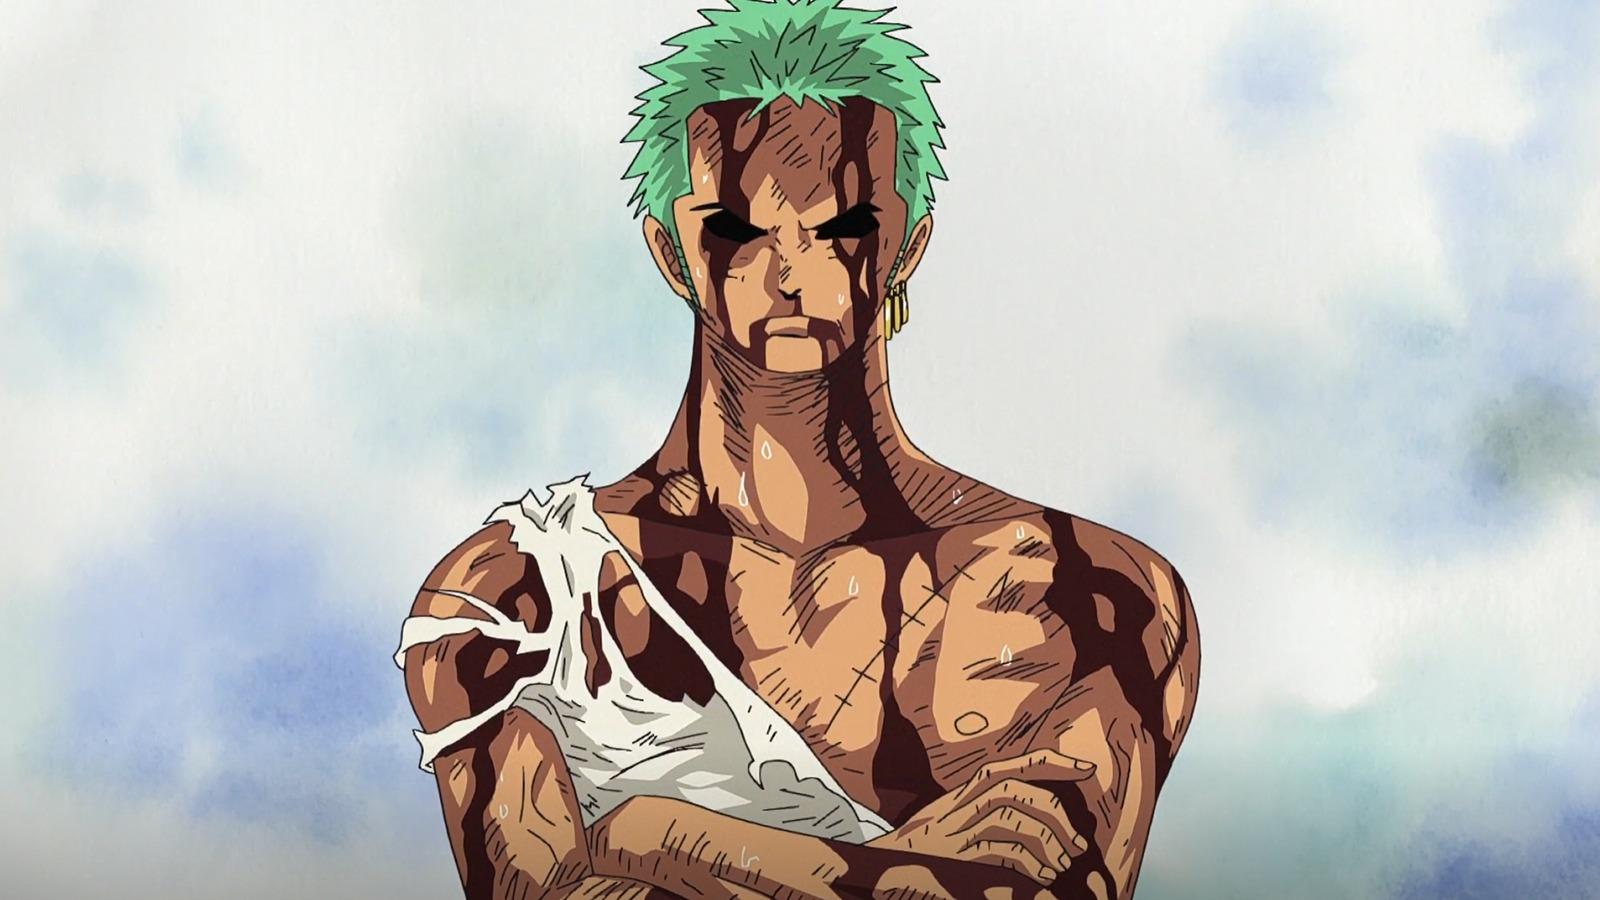 An image featuring Zoro's sacrifice in One Piece